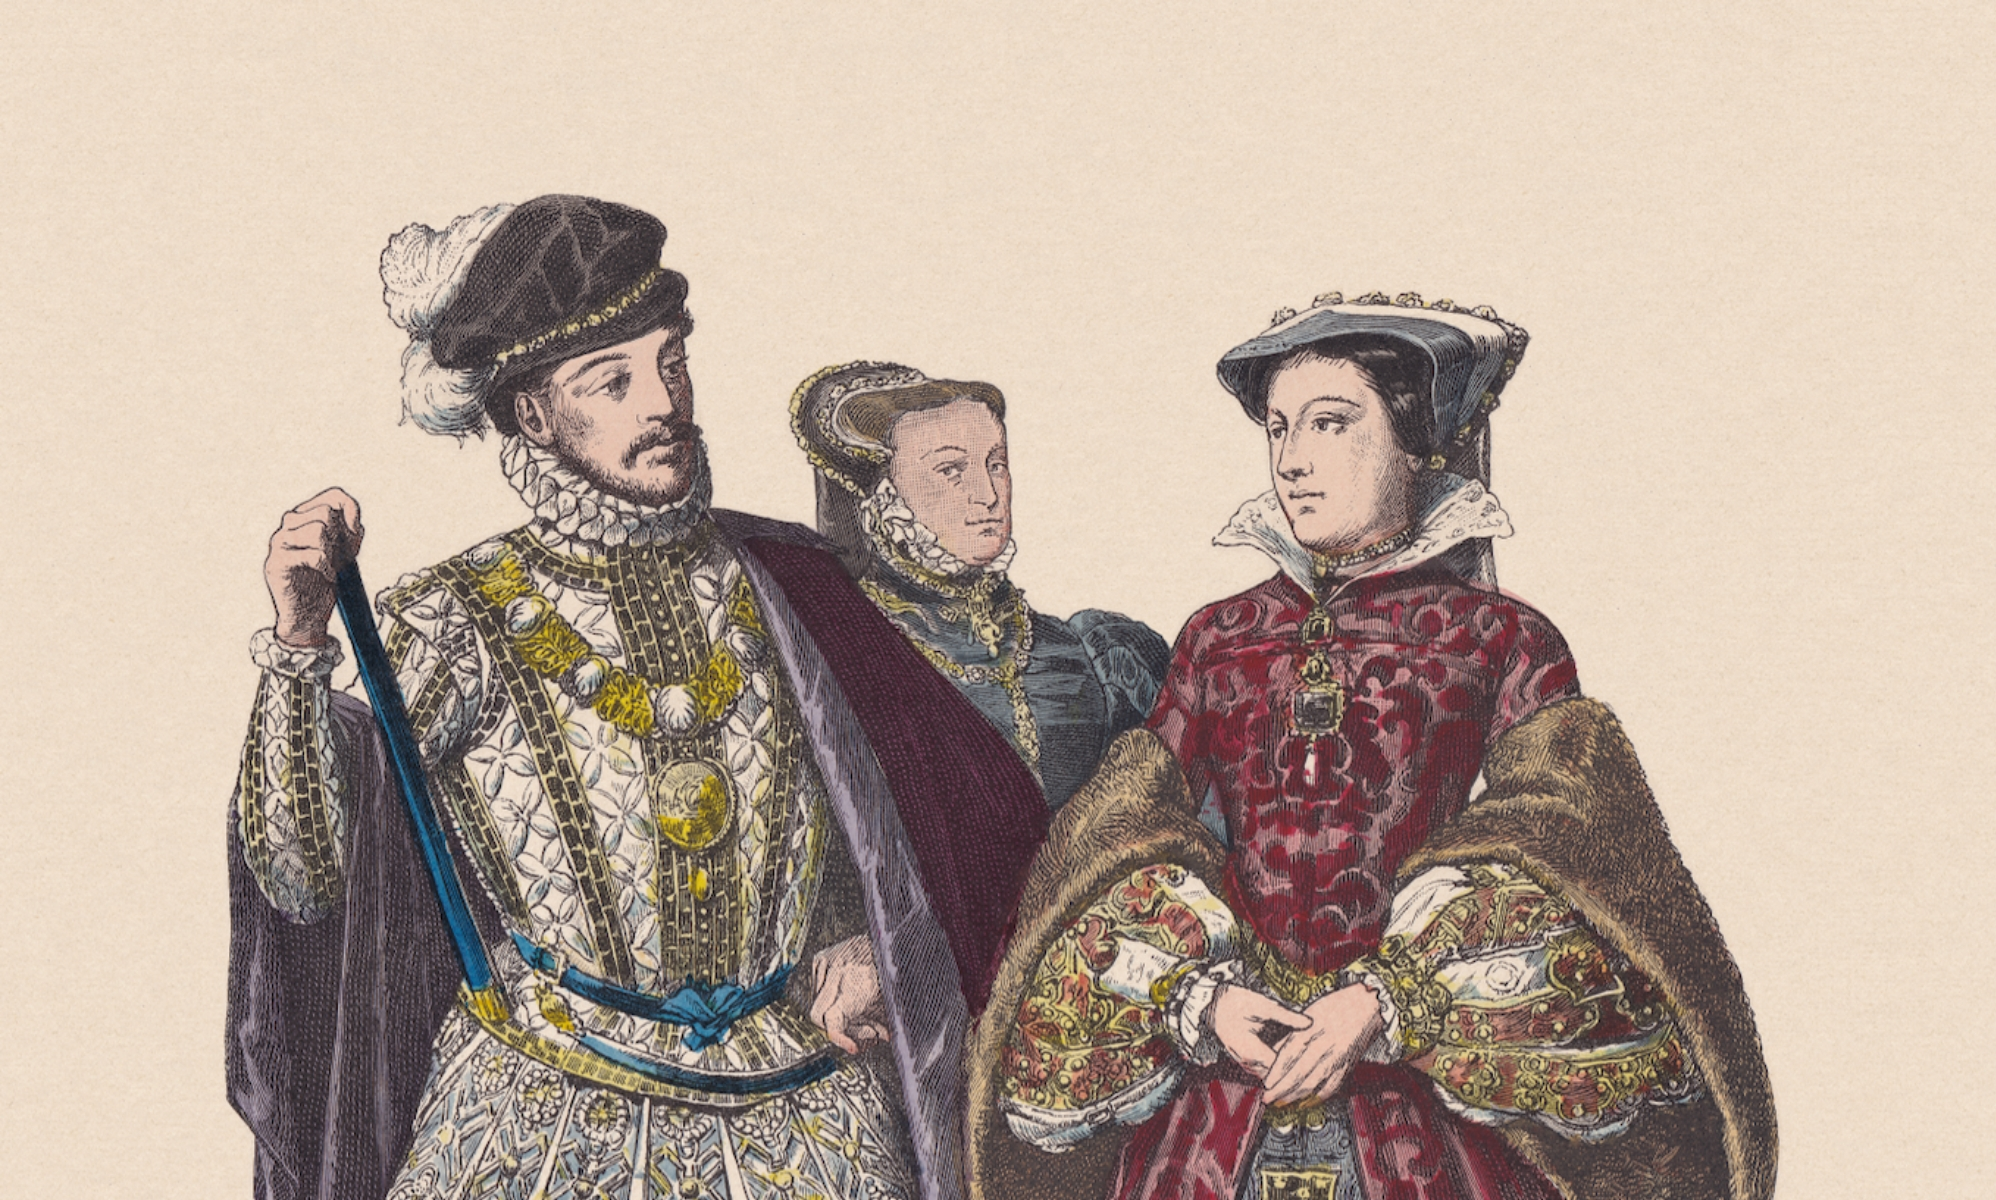 James VI’s dad may well have been queer – if the messy gay chaos of his life is anything to go by